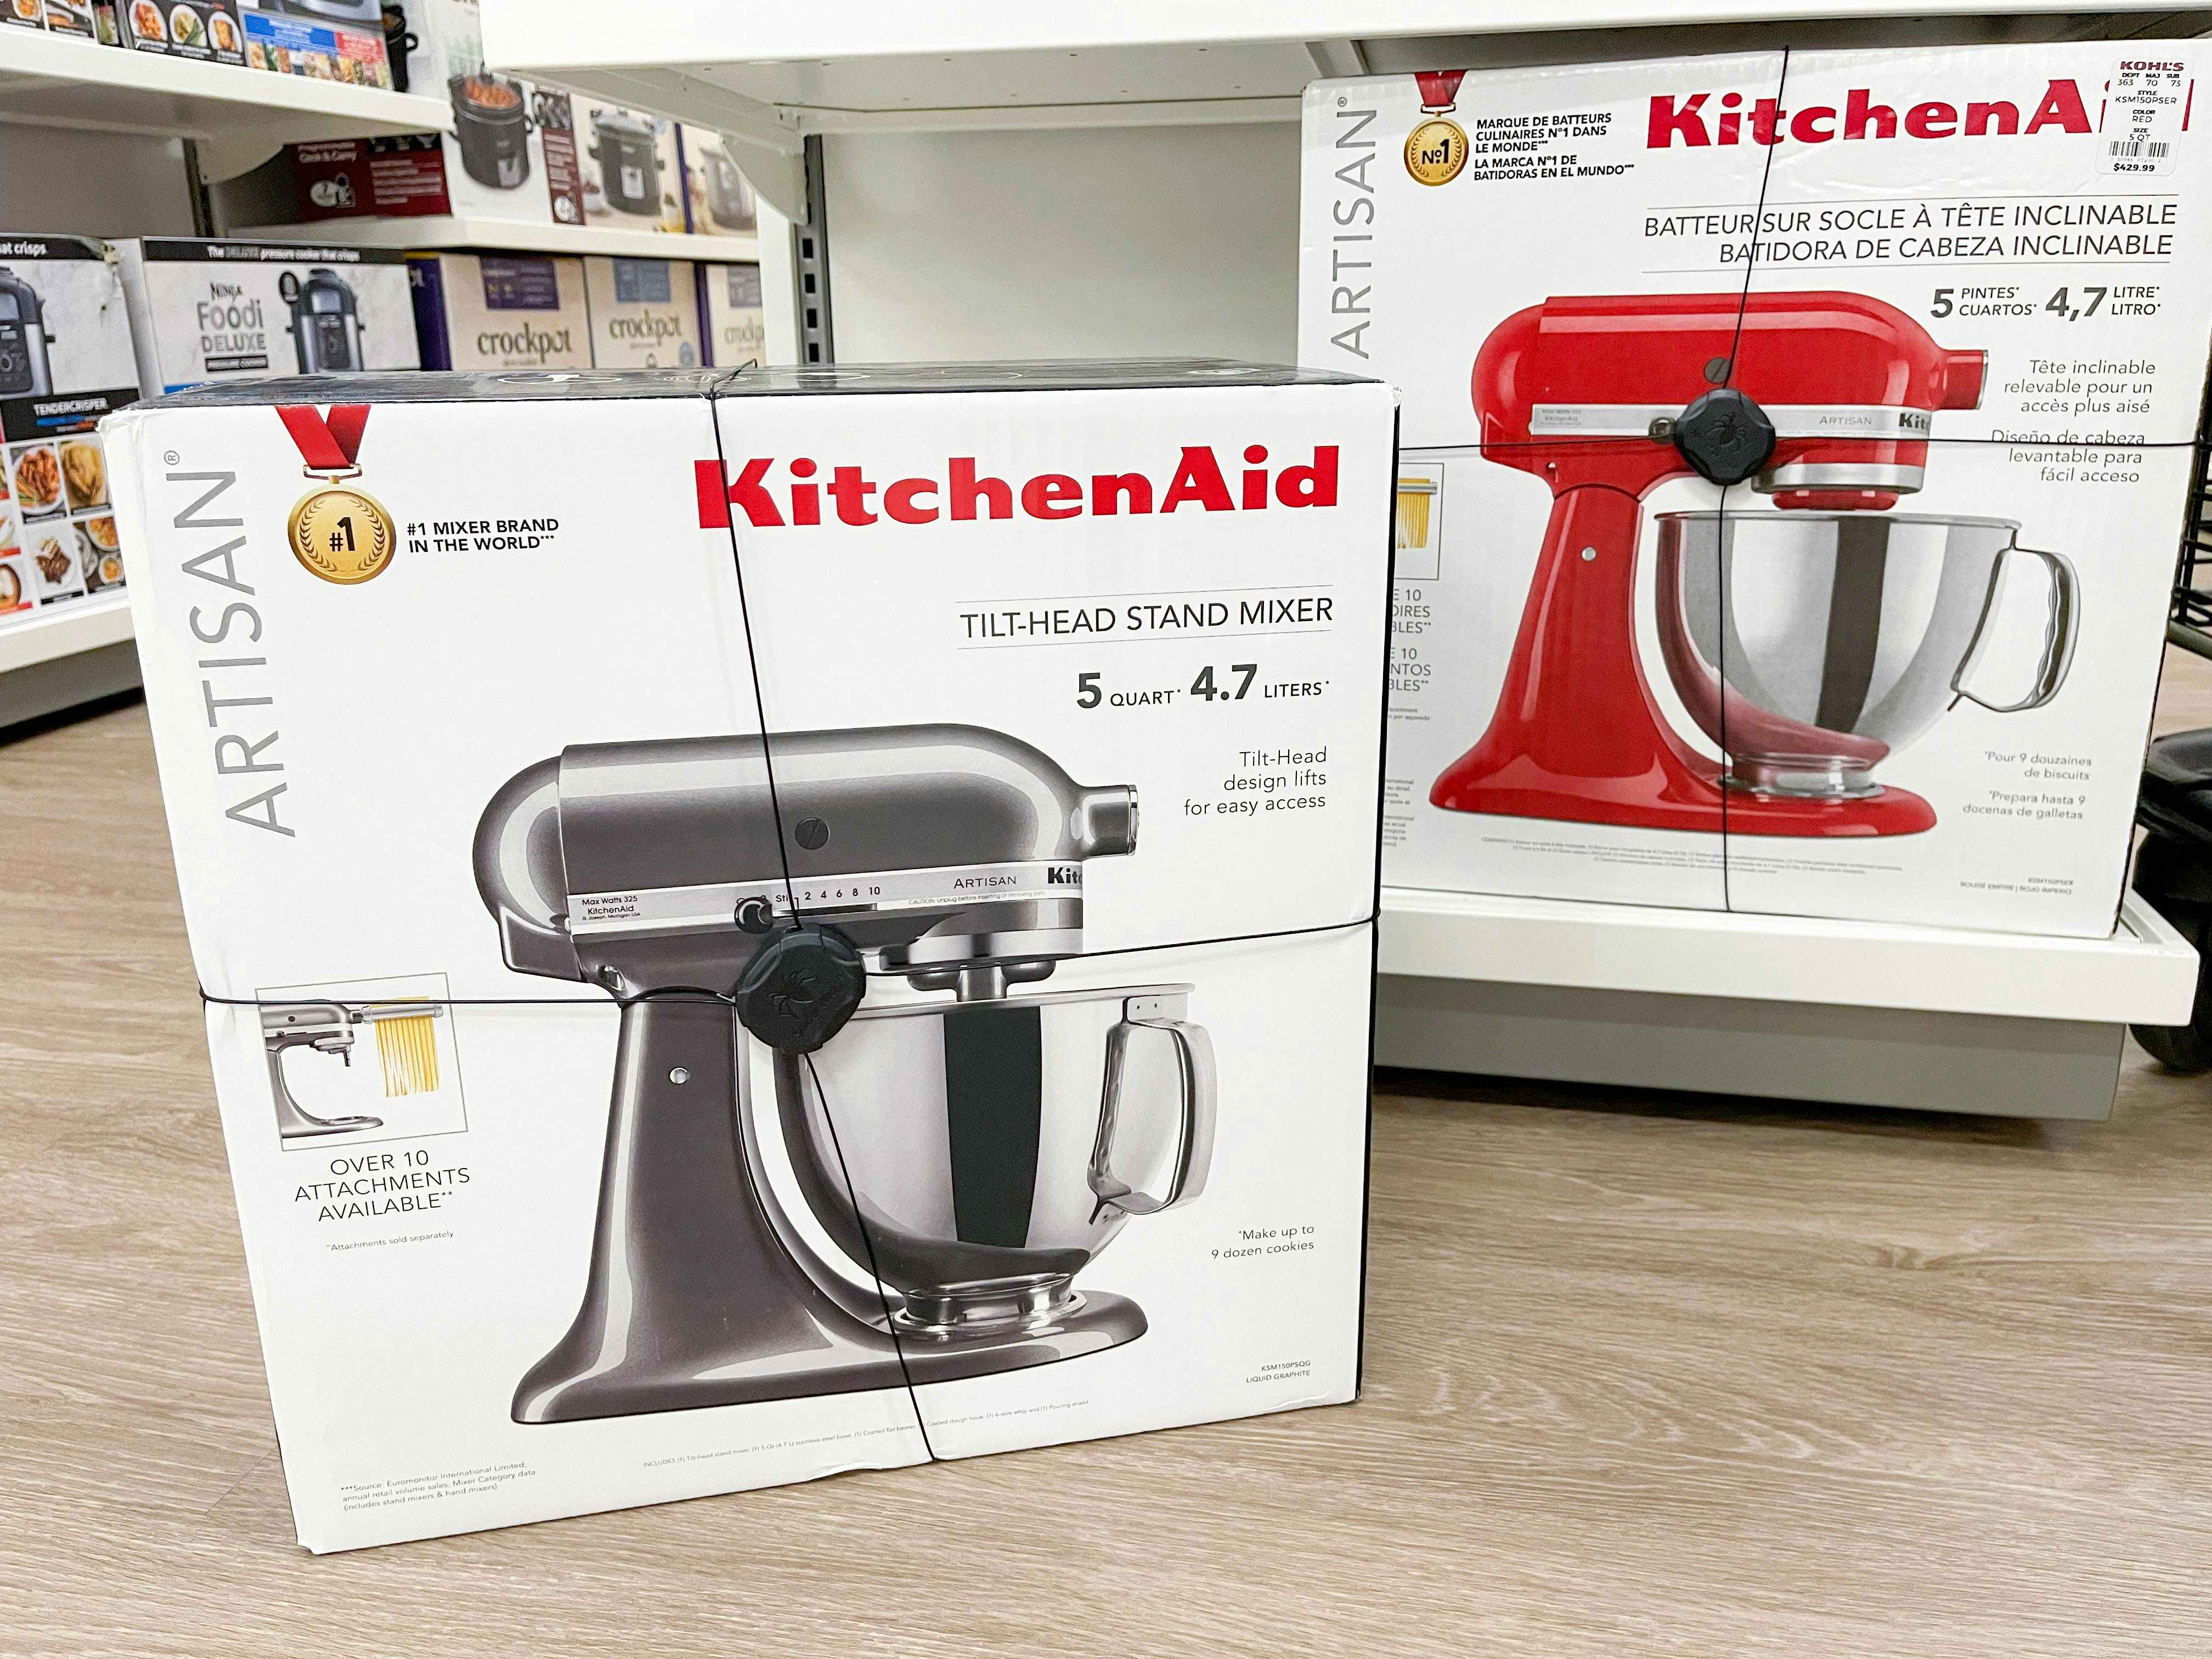 7 Tricks For Finding a KitchenAid Mixer Sale to Get the Best Price